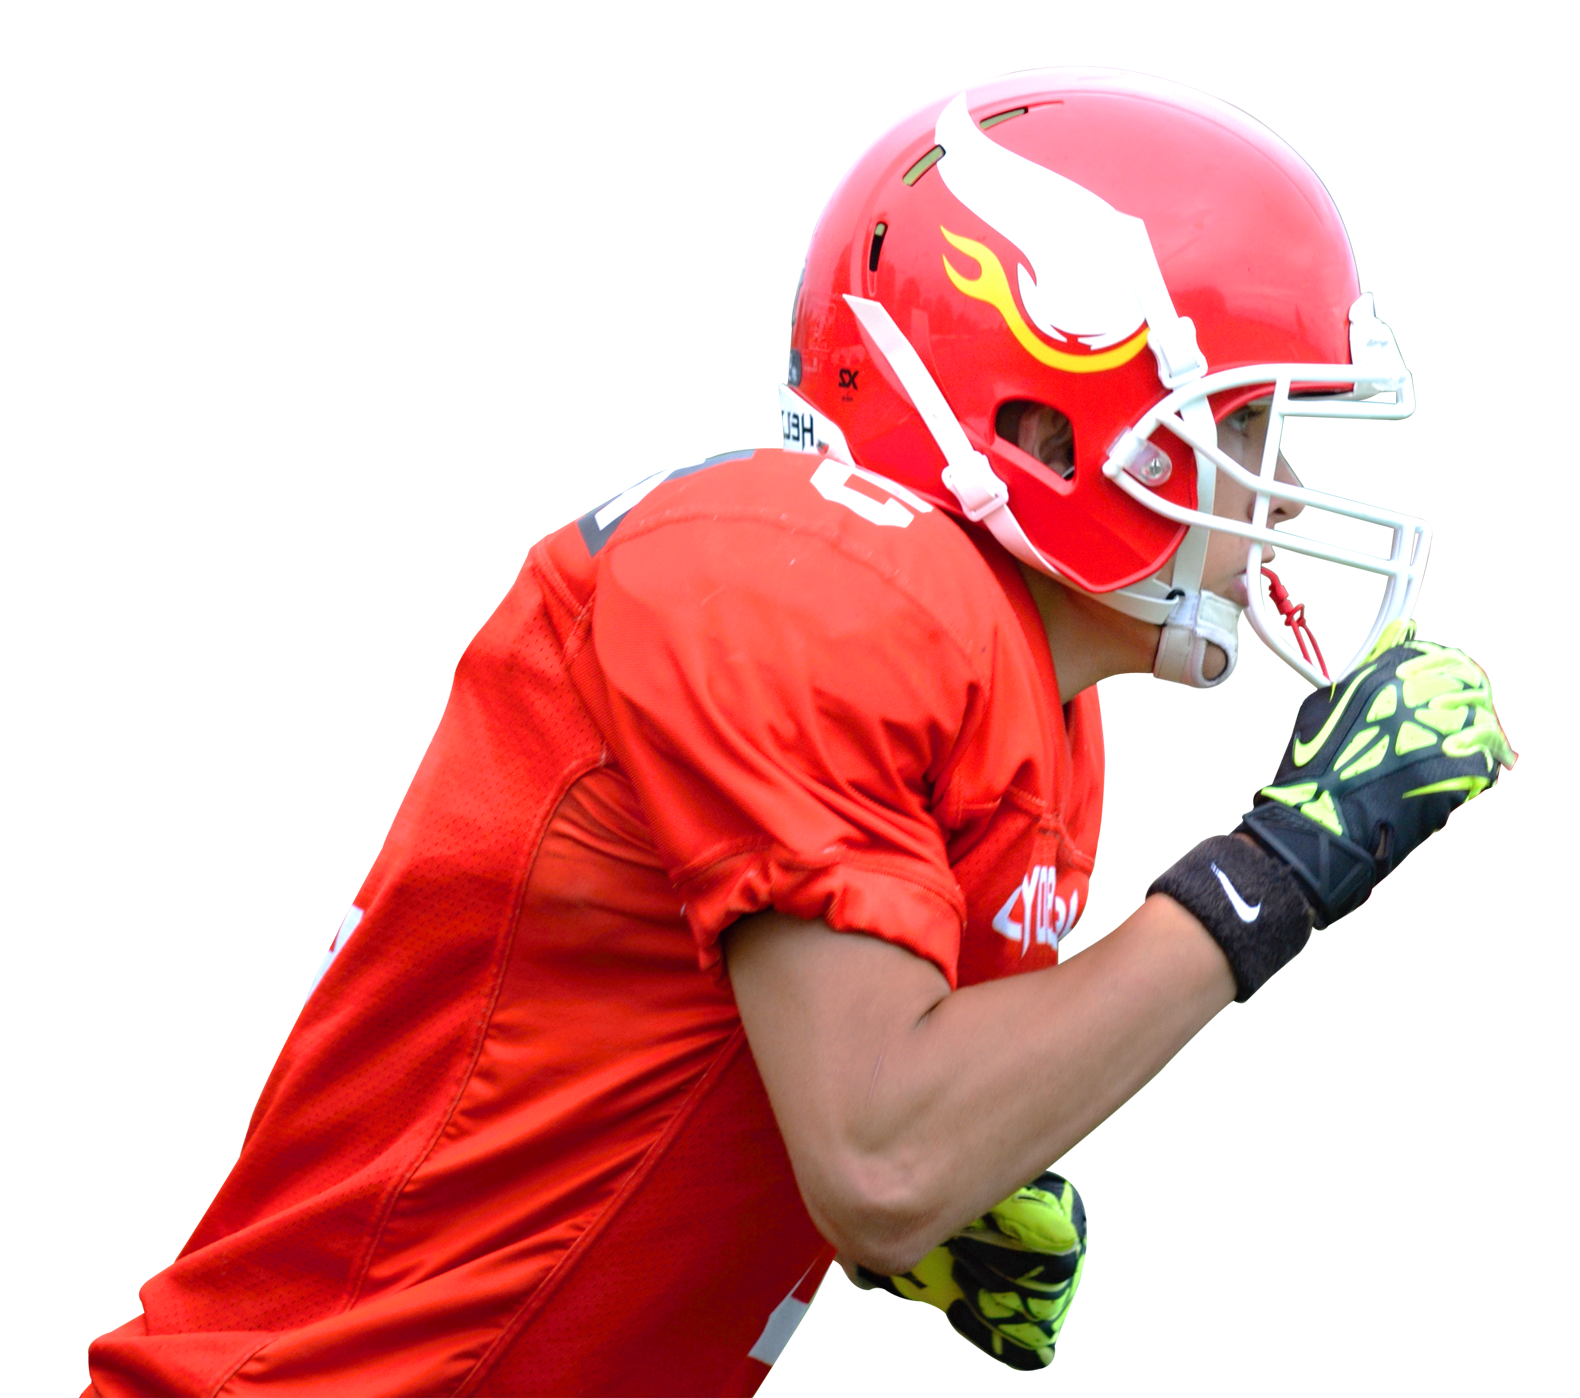 A Football Player Wearing A Red Uniform And Gloves